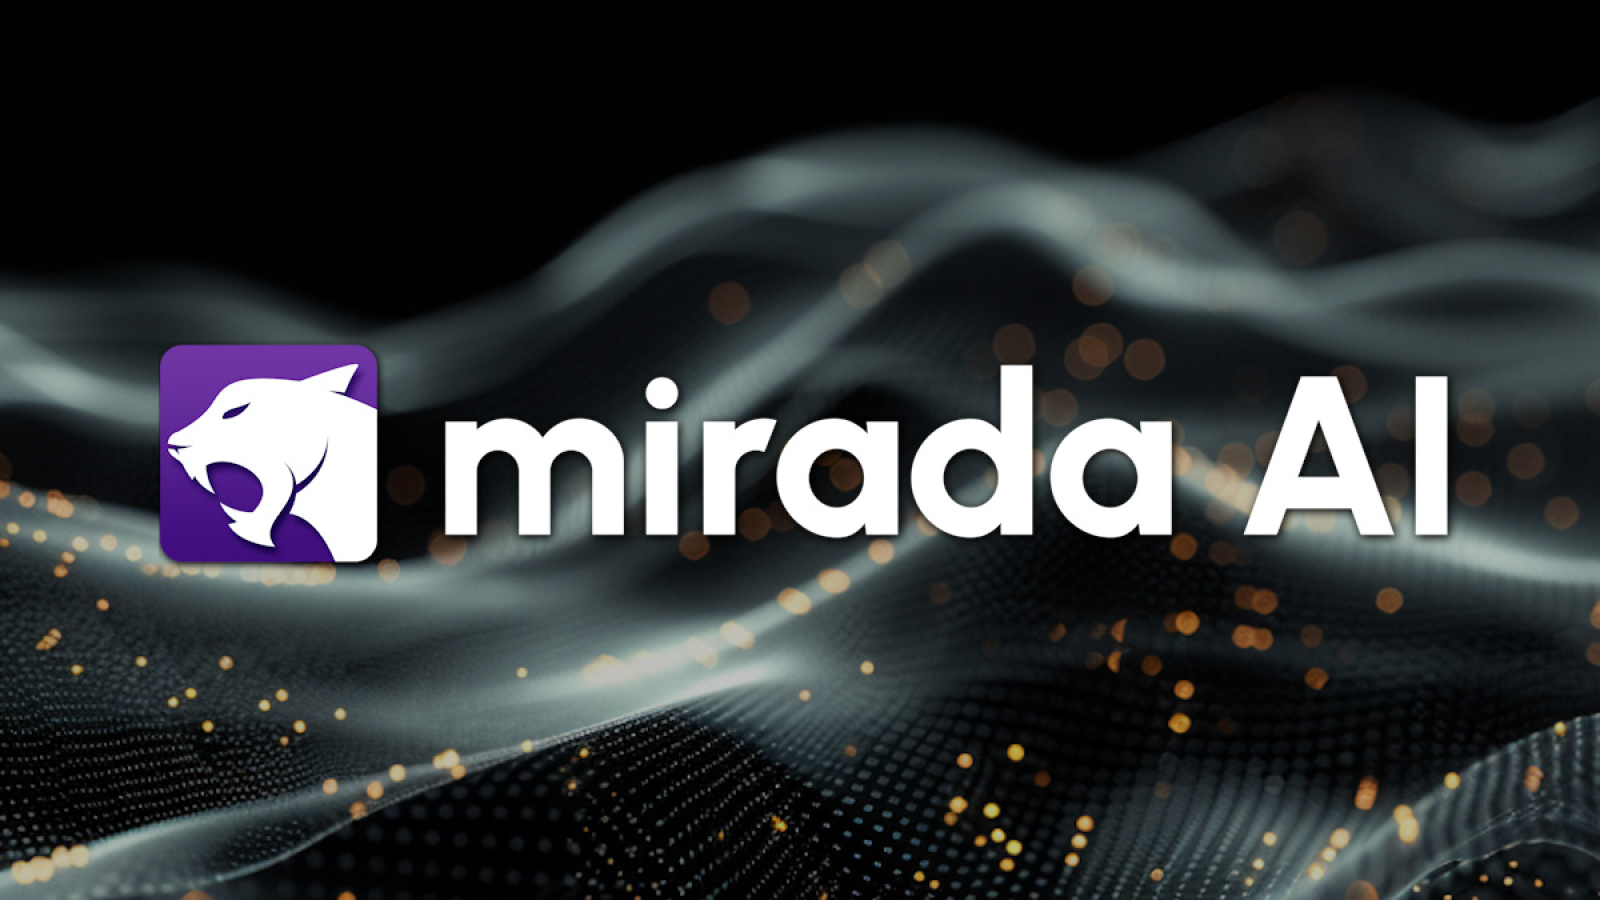 Mirada AI Sets Stage for Decentralized AI Revolution with Upcoming IDO